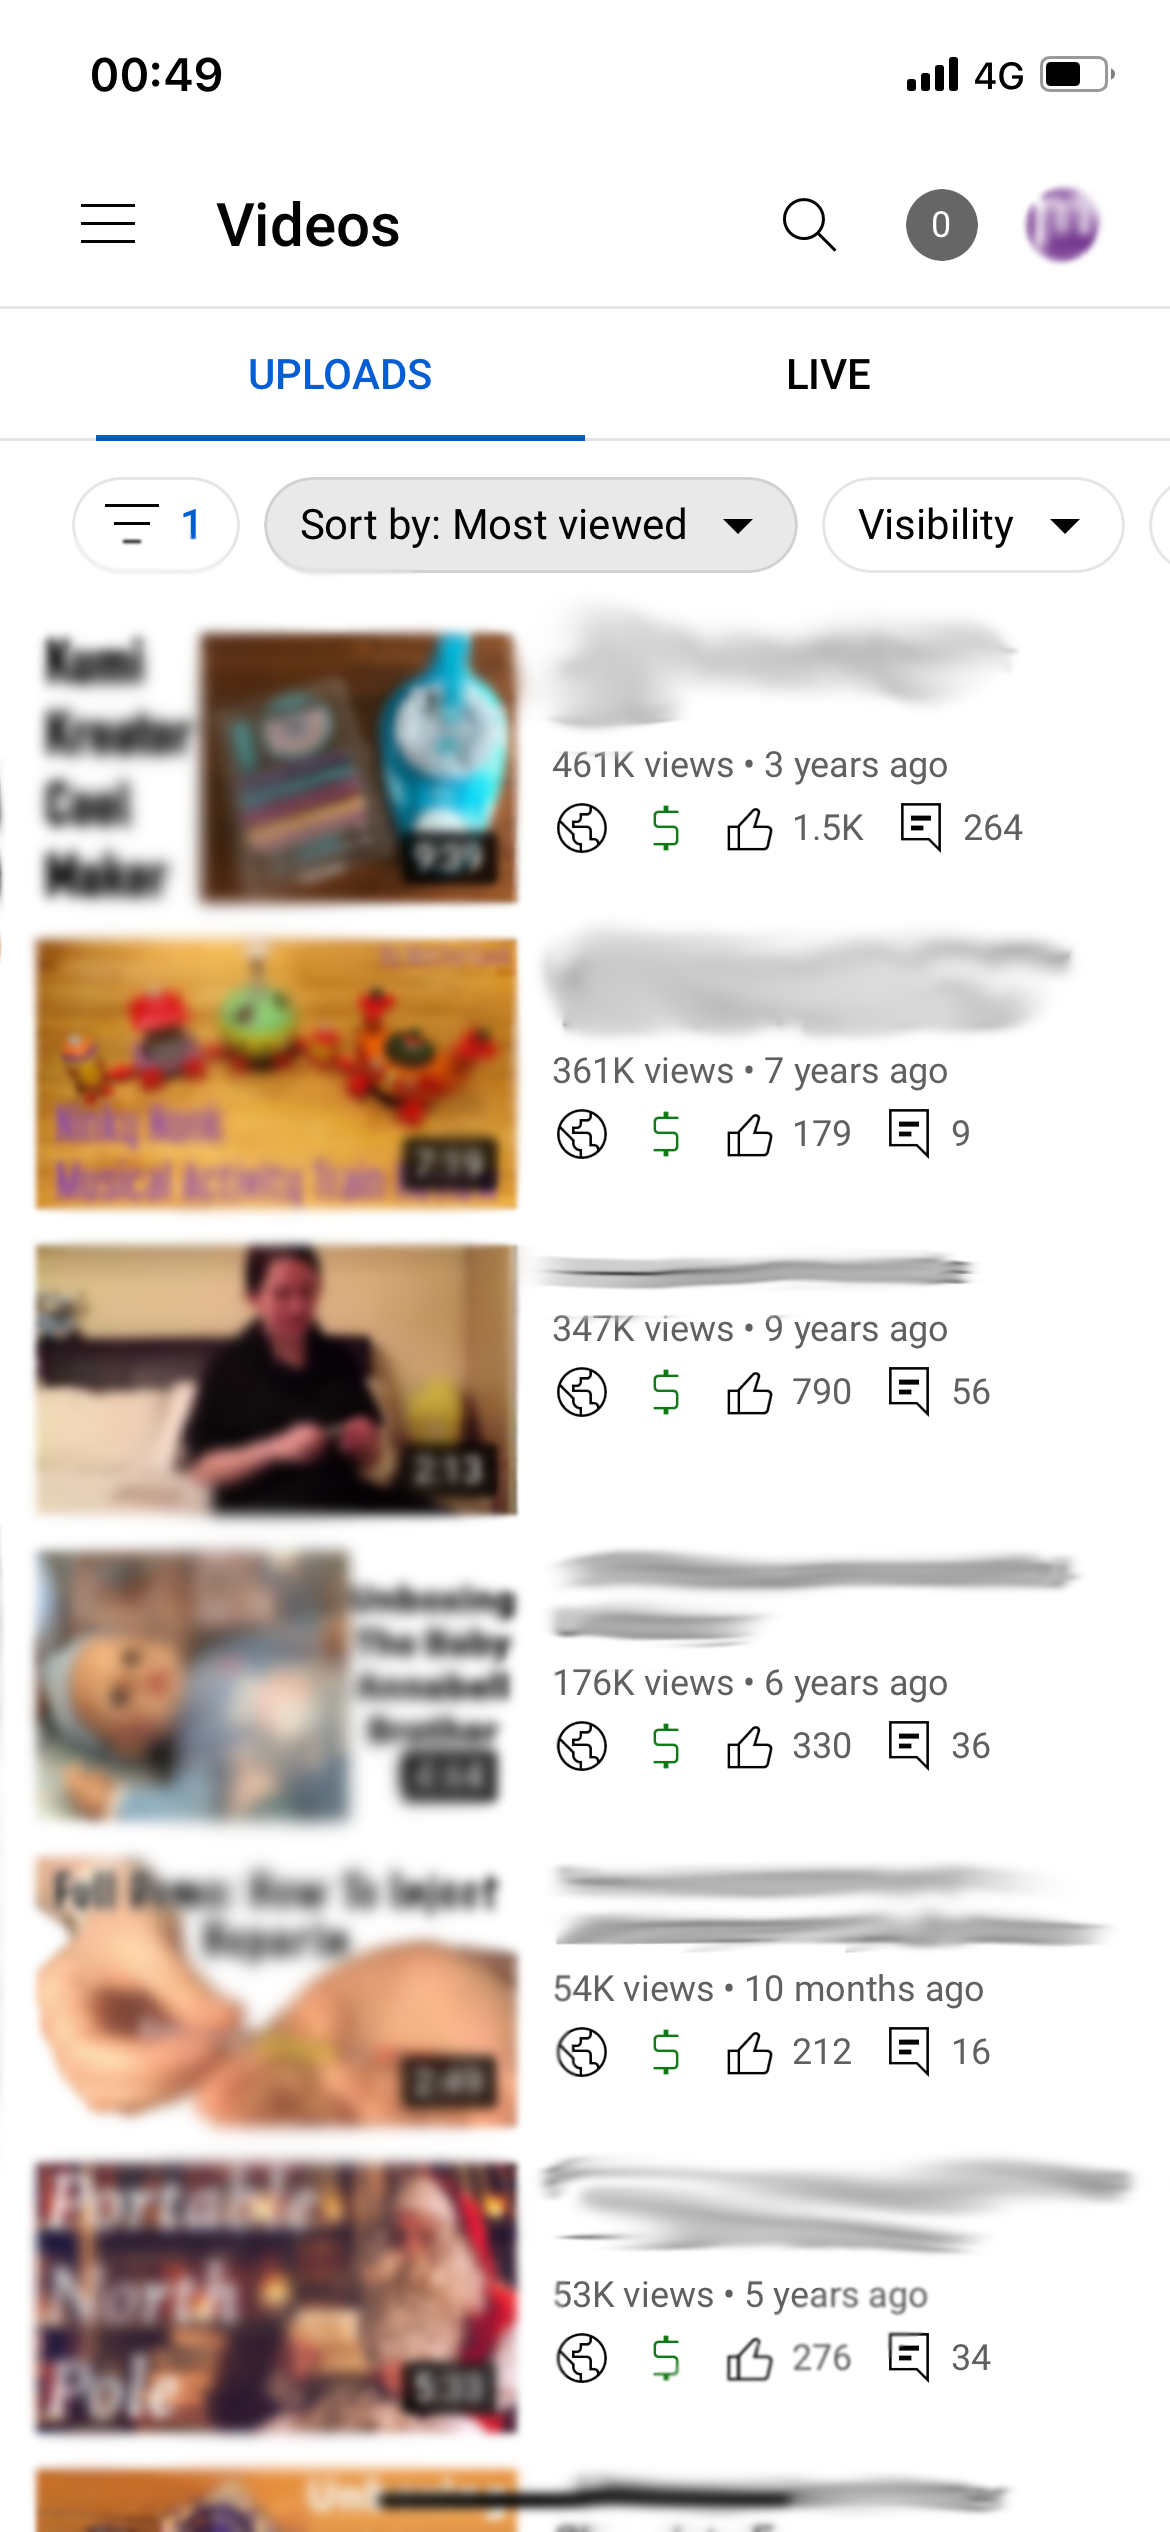 YouTube Studio App showing videos sorted by most popular